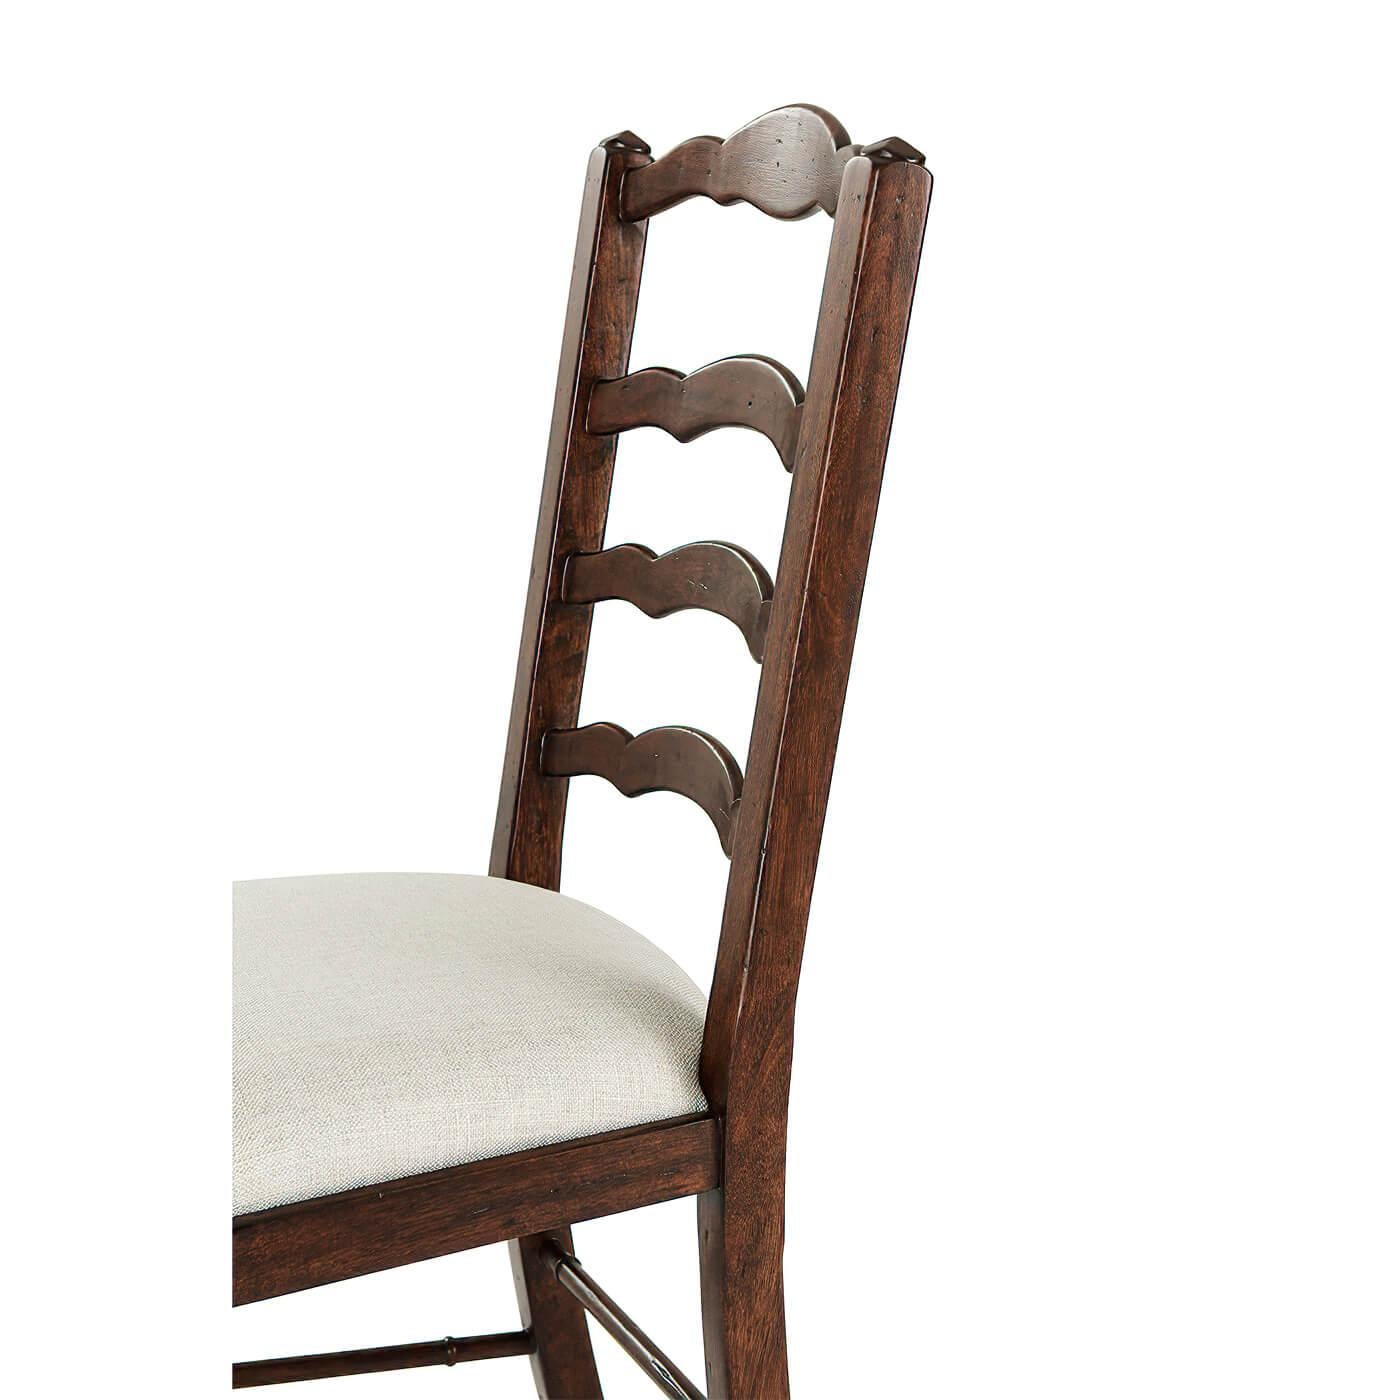 An English country-style antiqued wood dining side chair, the arched serpentine ladder back above an upholstered drop-in seat, on sabre legs joined by undulating stretchers.

Dimensions: 20